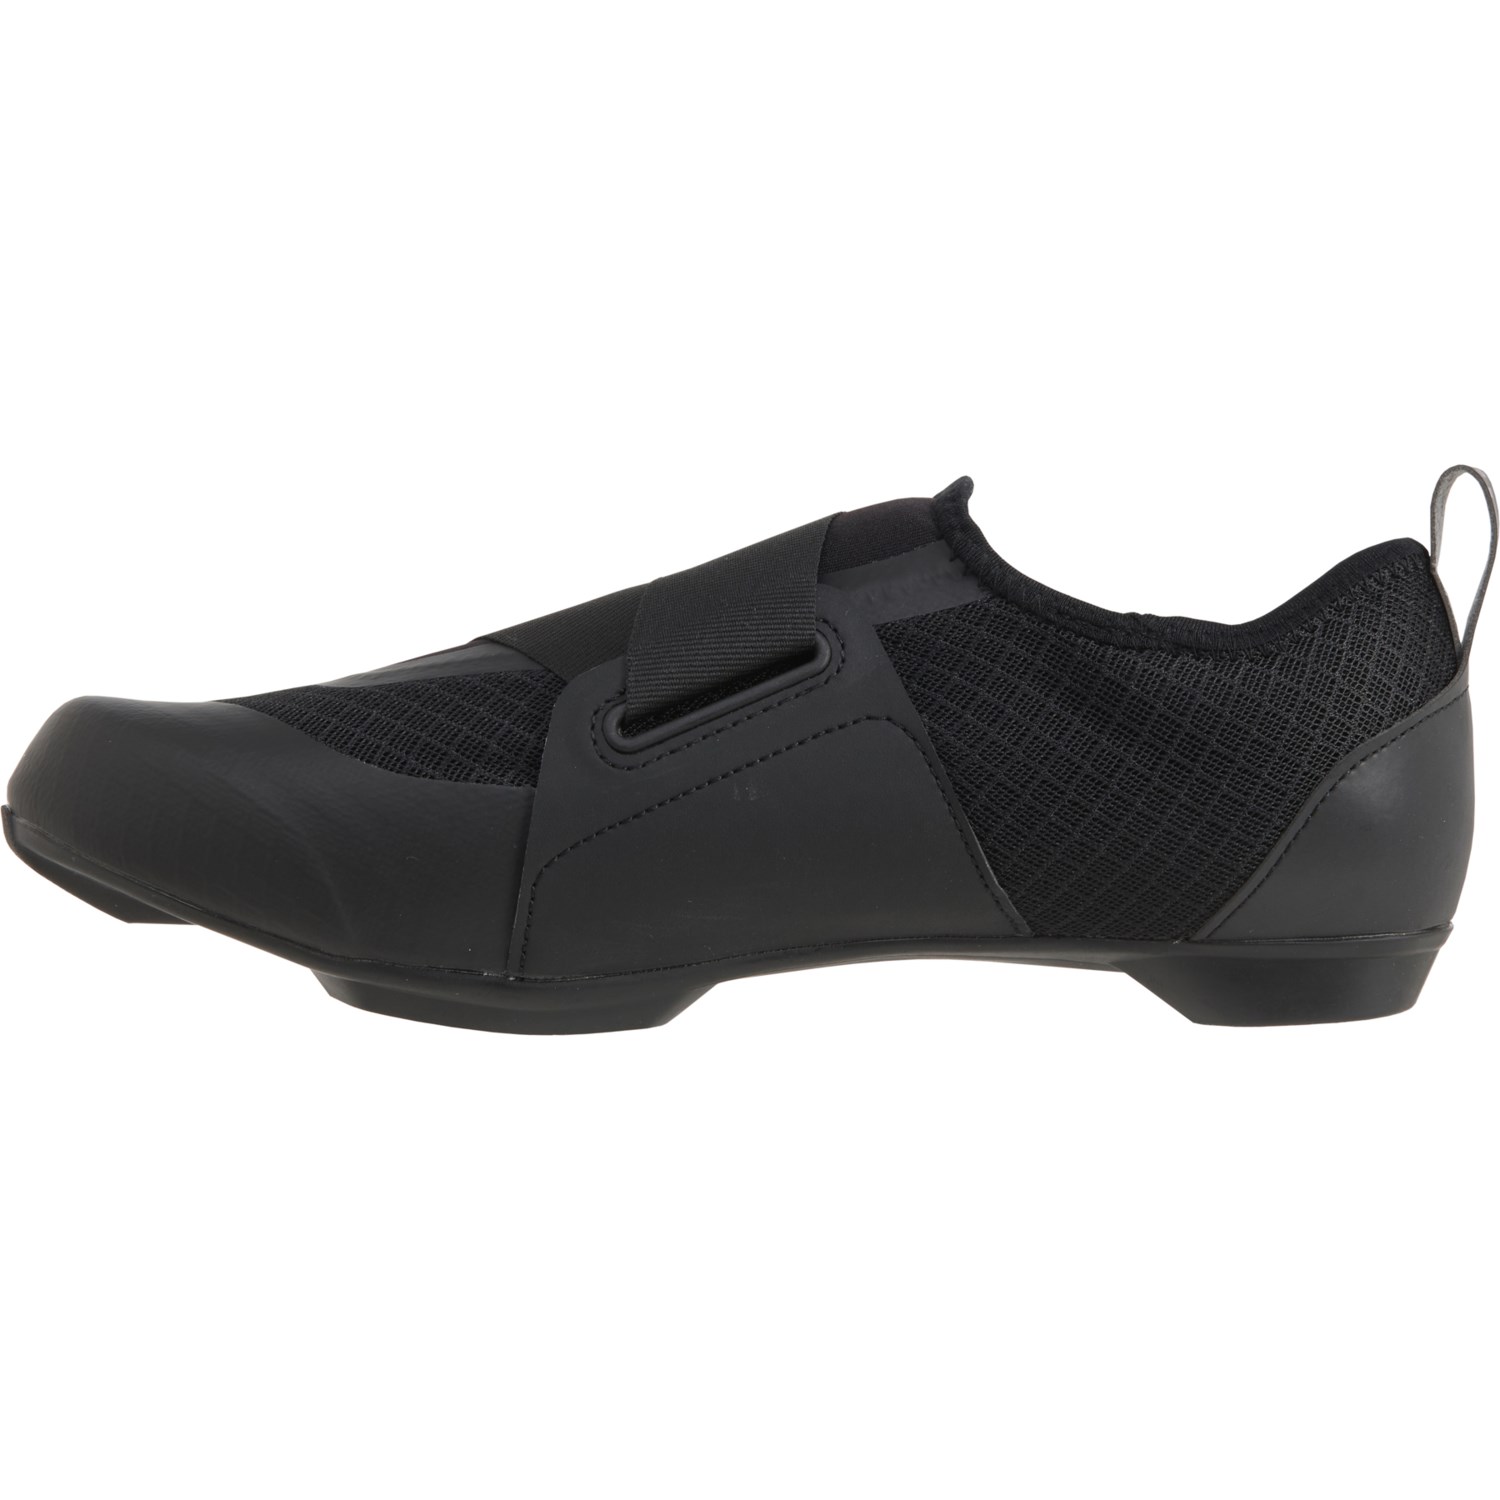 Shimano SH-IC200 Indoor Cycling Shoes (For Men and Women) - Save 80%